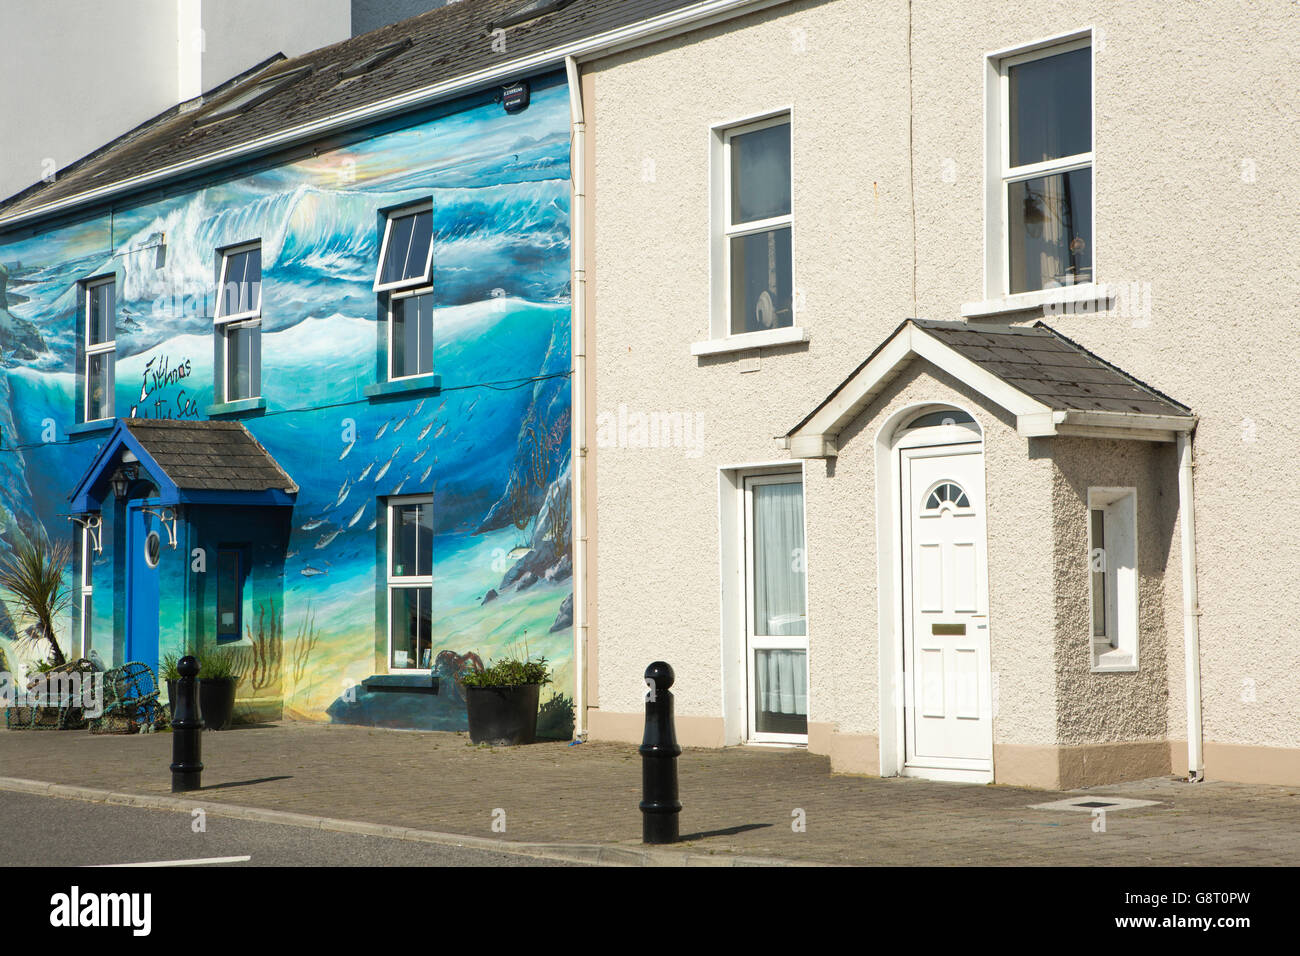 Ireland, Co Sligo, Mullaghmore, Harbour, Eithnas by the Sea, seafood restaurant with painted front next to unpainted neighbour Stock Photo